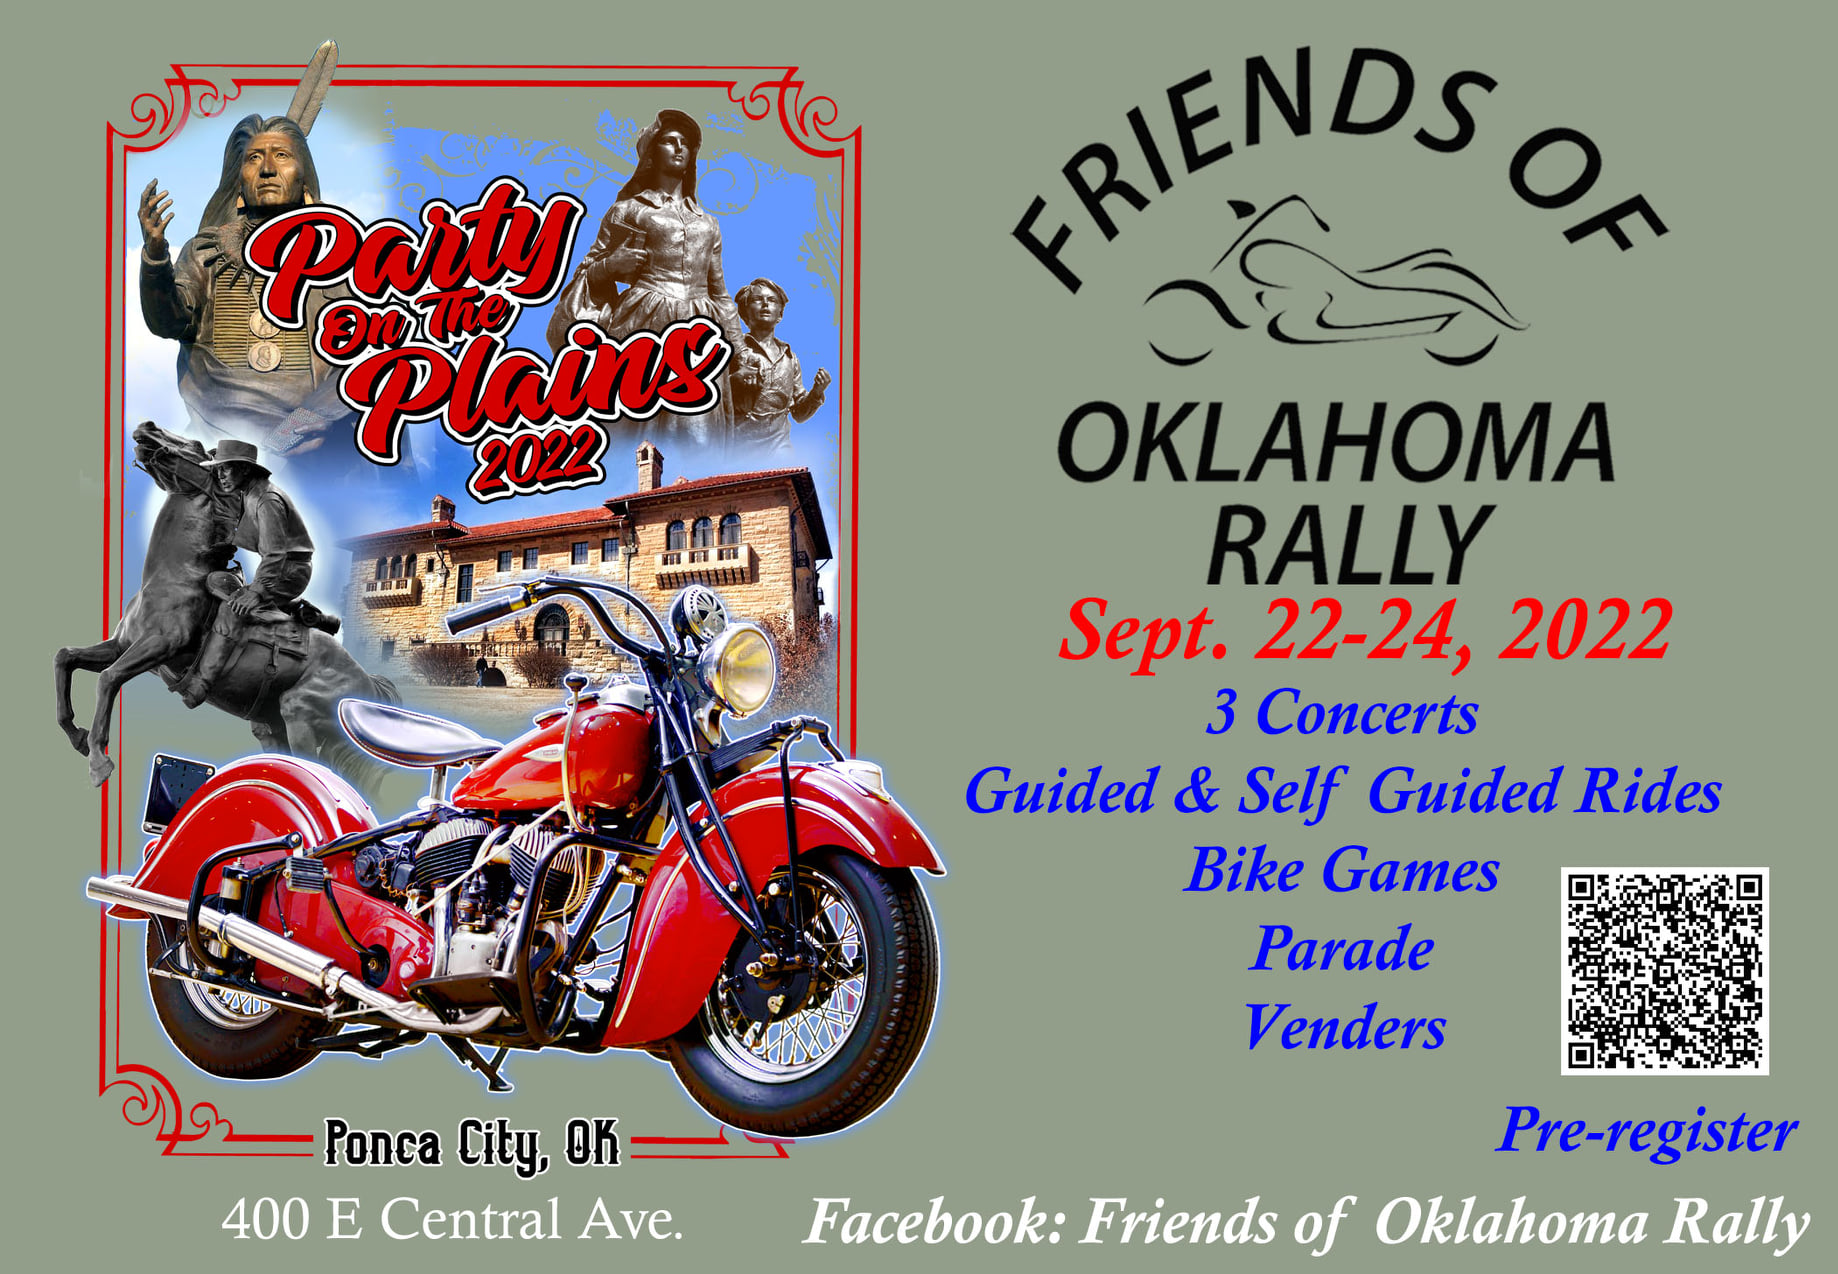 Friends of Oklahoma Rally “Party on the Plains 2022” is September 22-24 in Ponca City